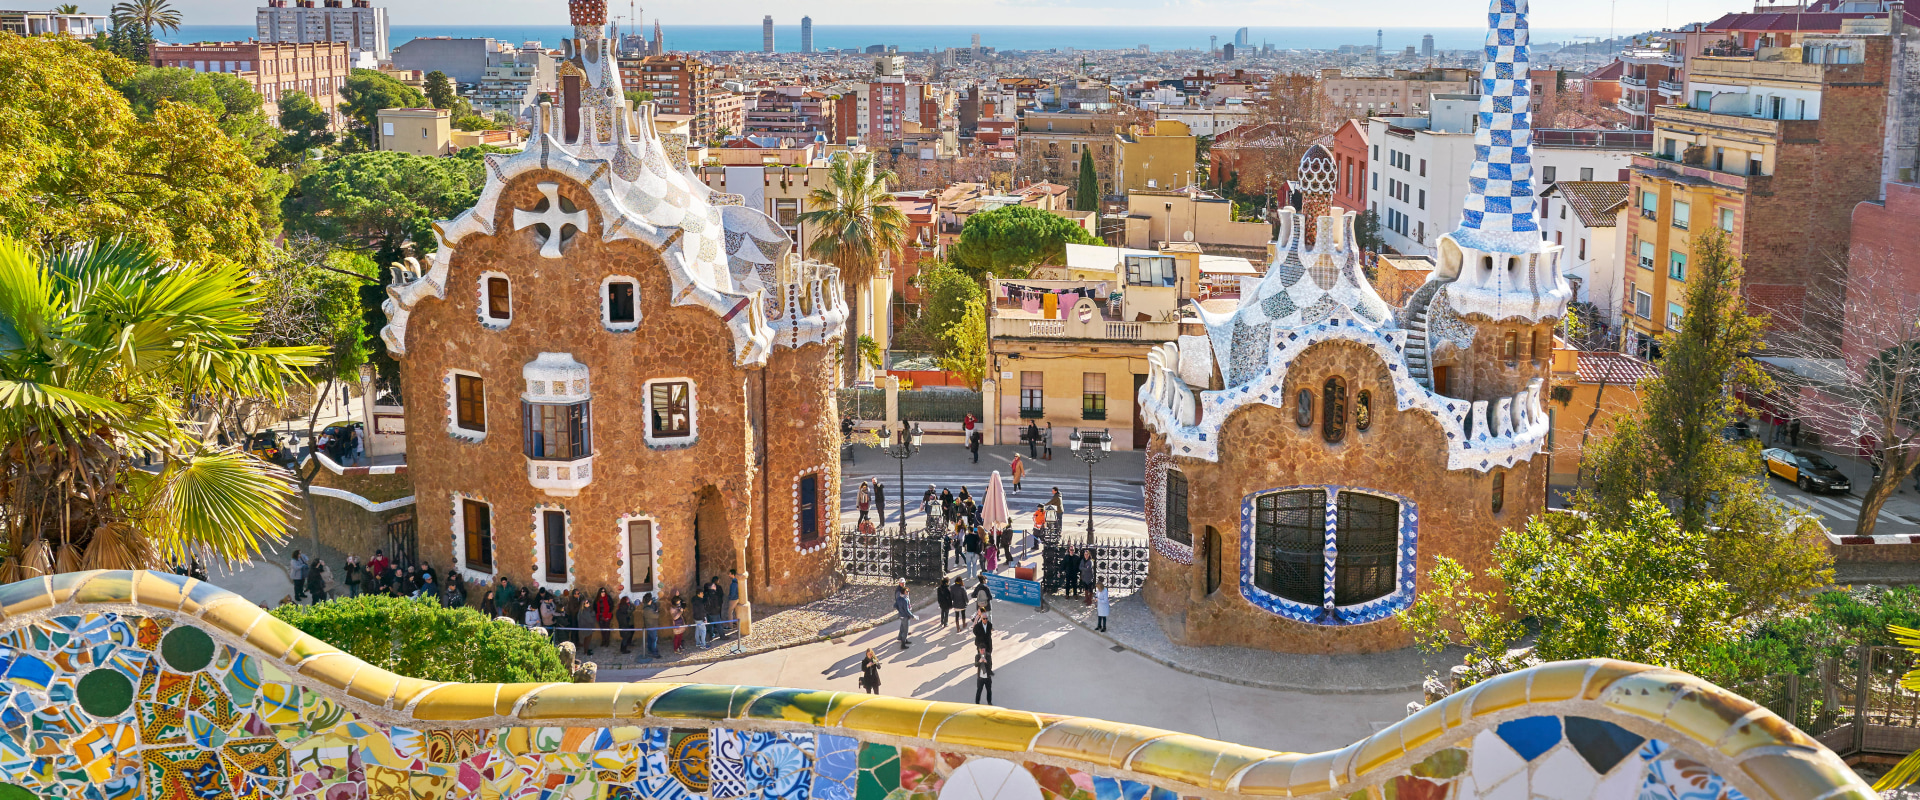 Tourist attractions in spain barcelona?